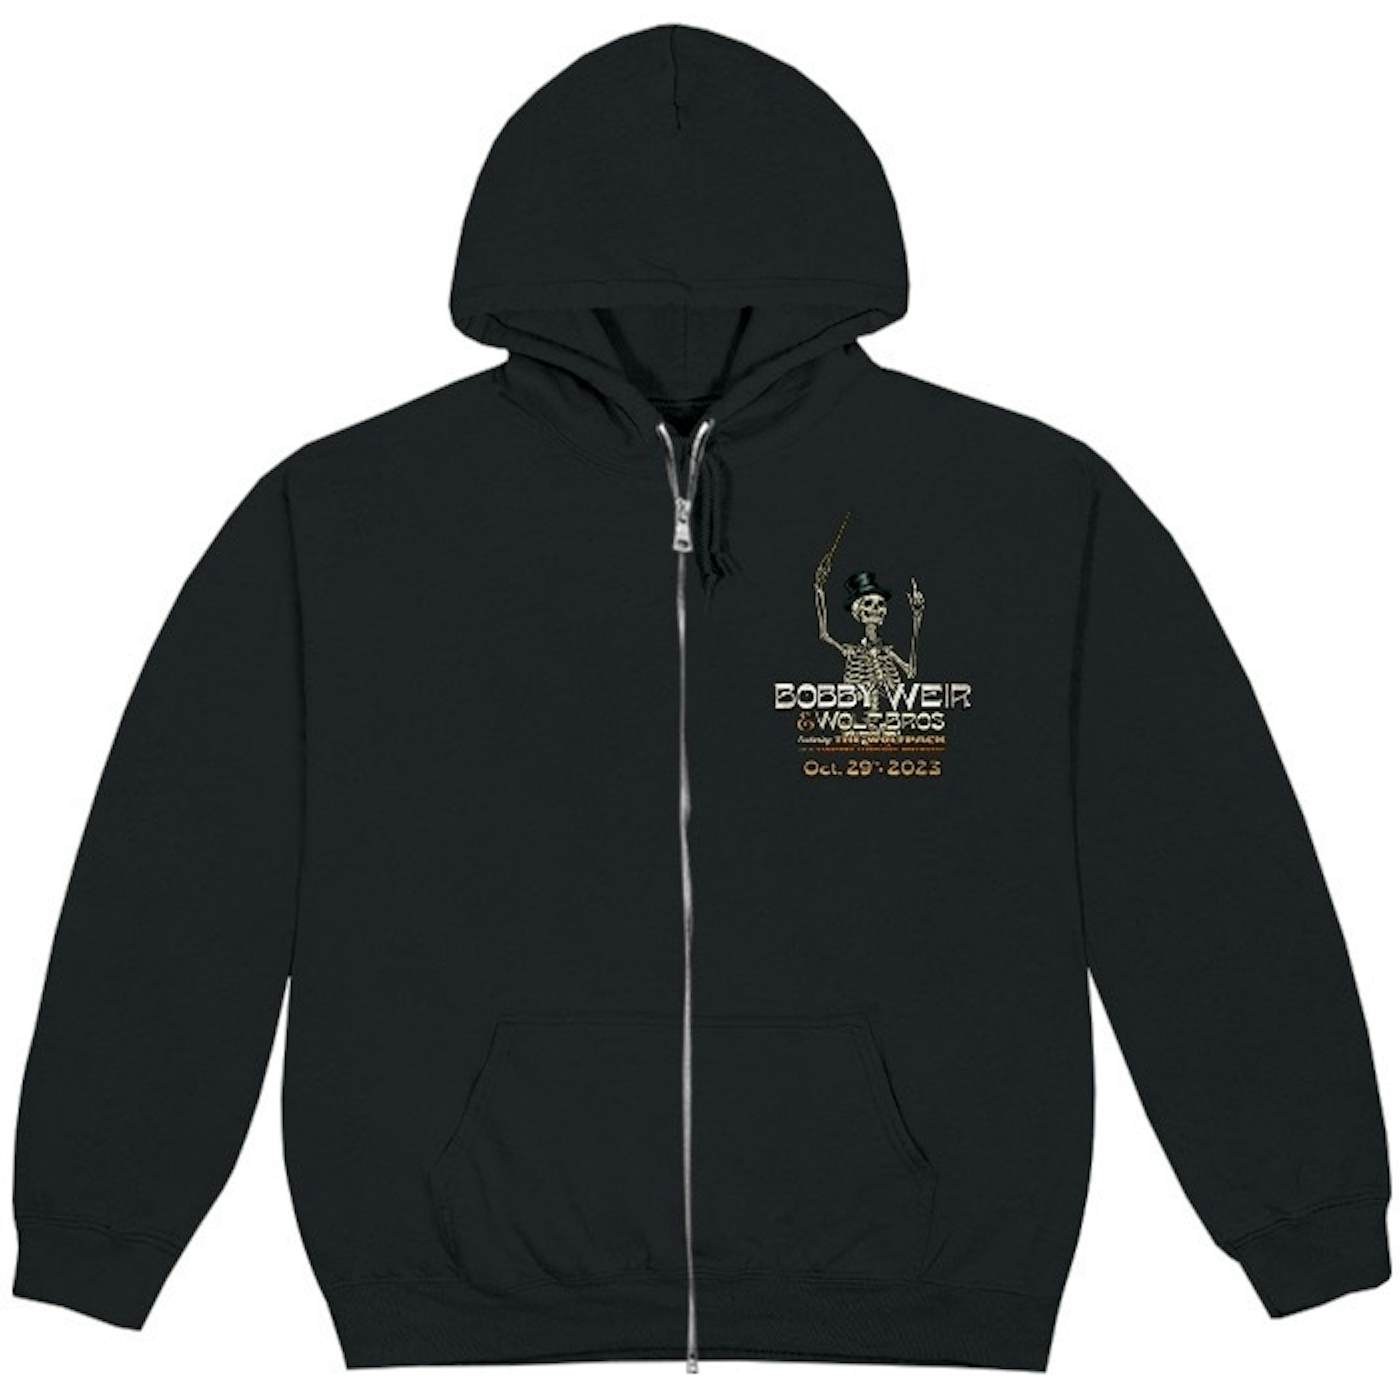 Bob Weir Bobby Weir and Wolf Bros Frost Event Zip Hoodie